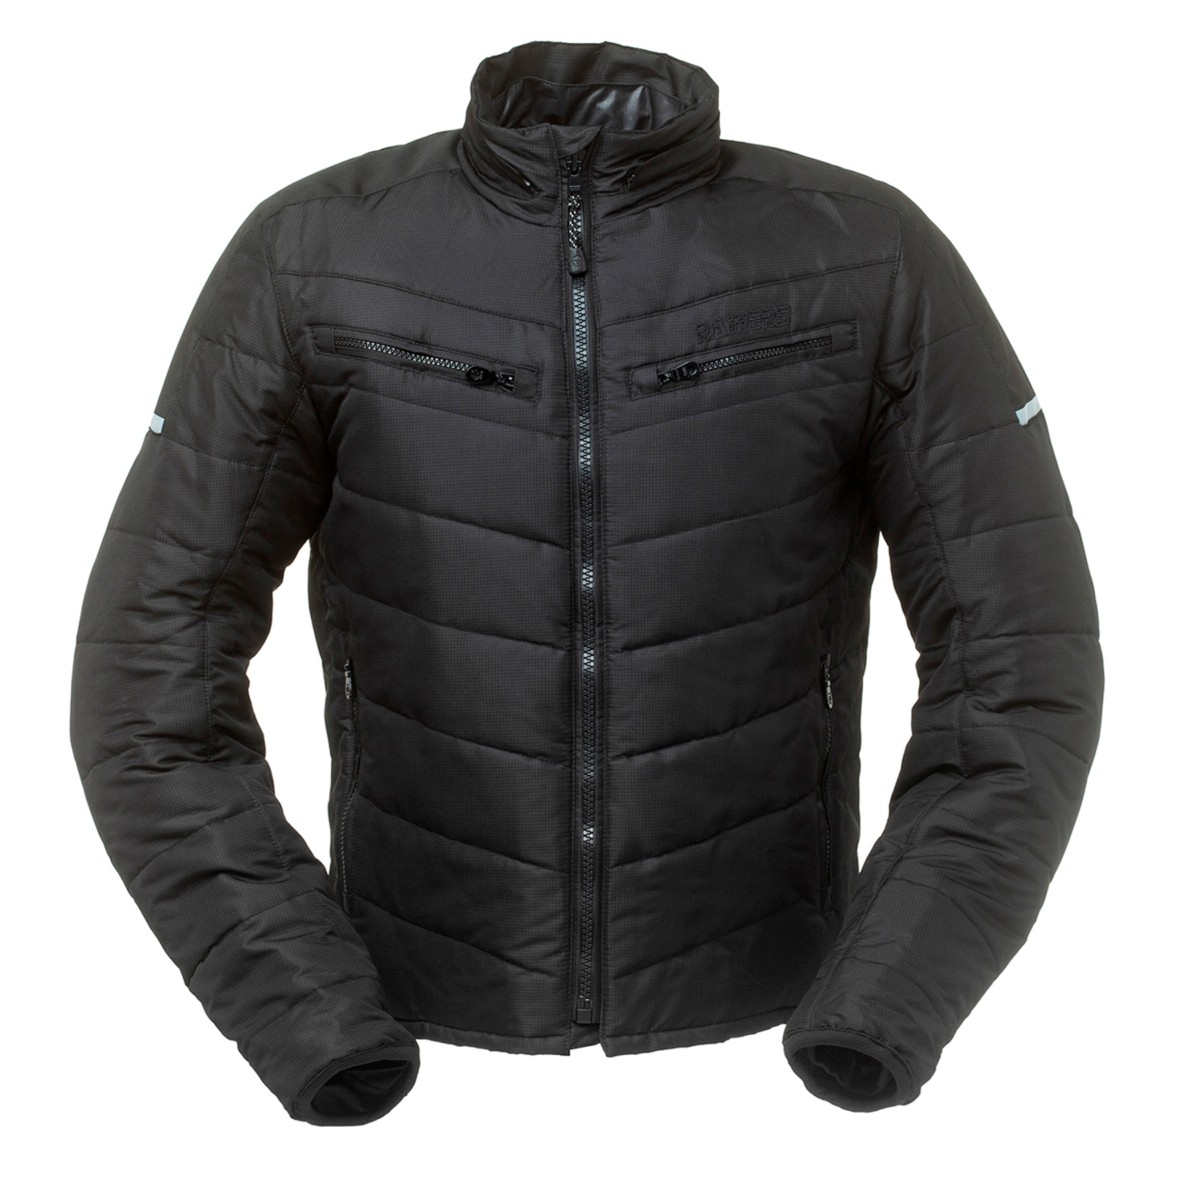 Chaqueta RAINERS DYLAN NEGRA INVIERNO Impermeable 